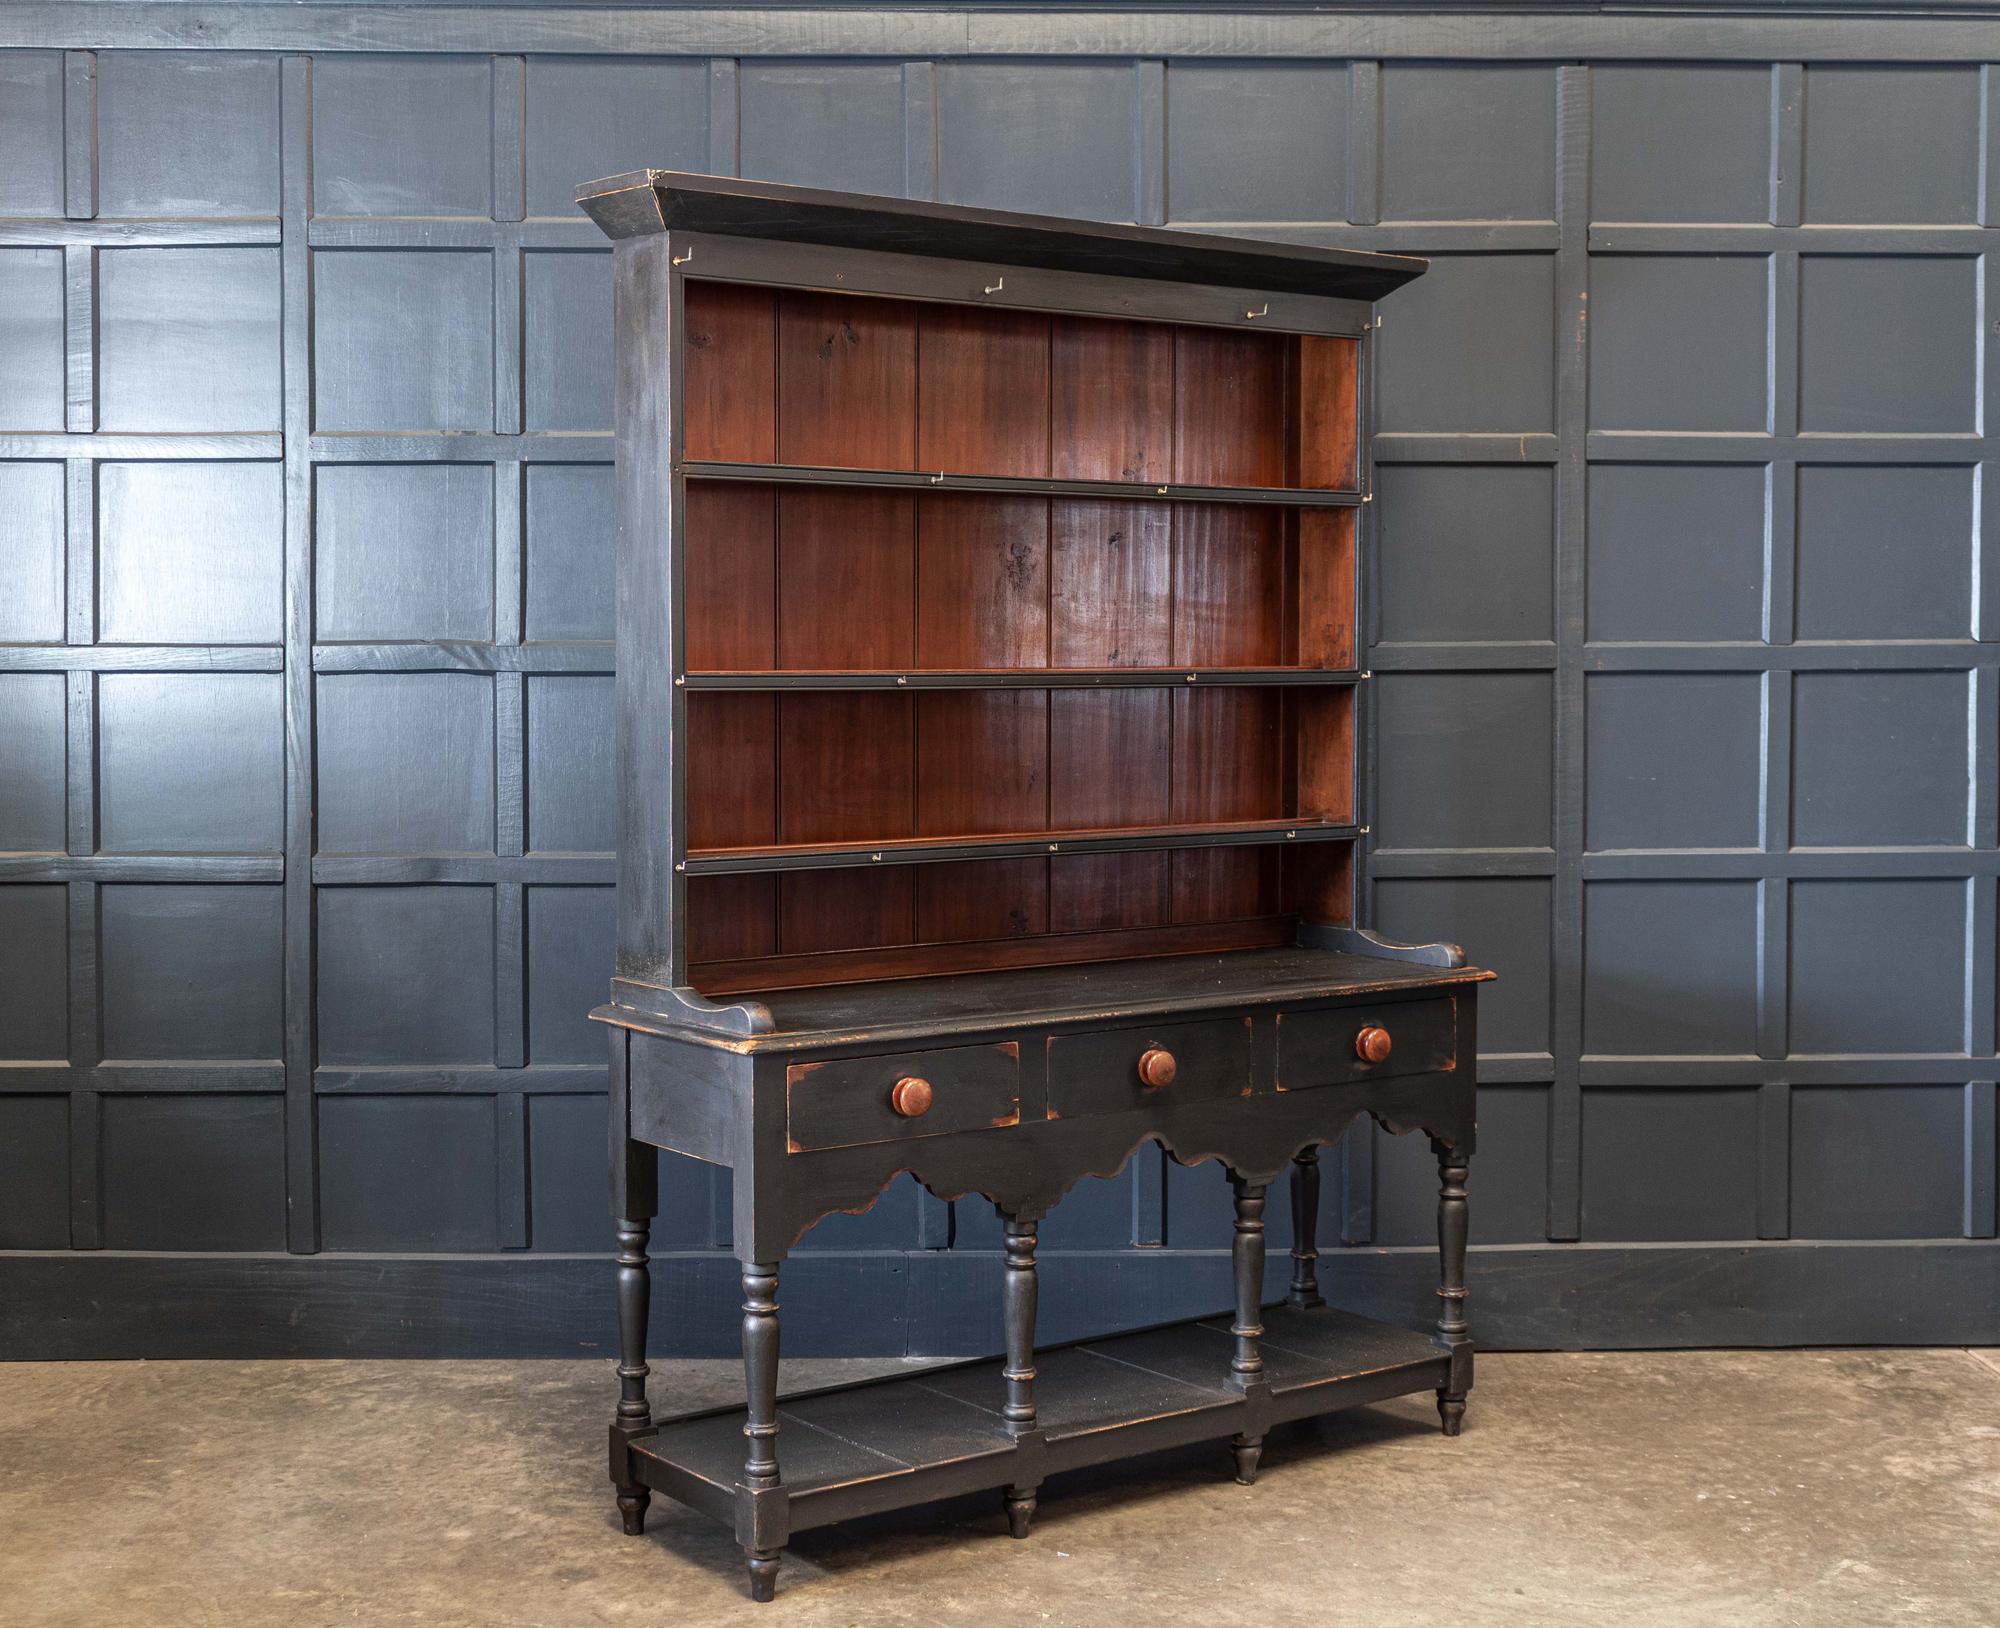 Circa 1850.

19th C English Ebonised Potboard pine dresser

Lovely scale shape and proportions

   

Measures: W 159 x D 47 x H 208cm.

(159cm cornice)